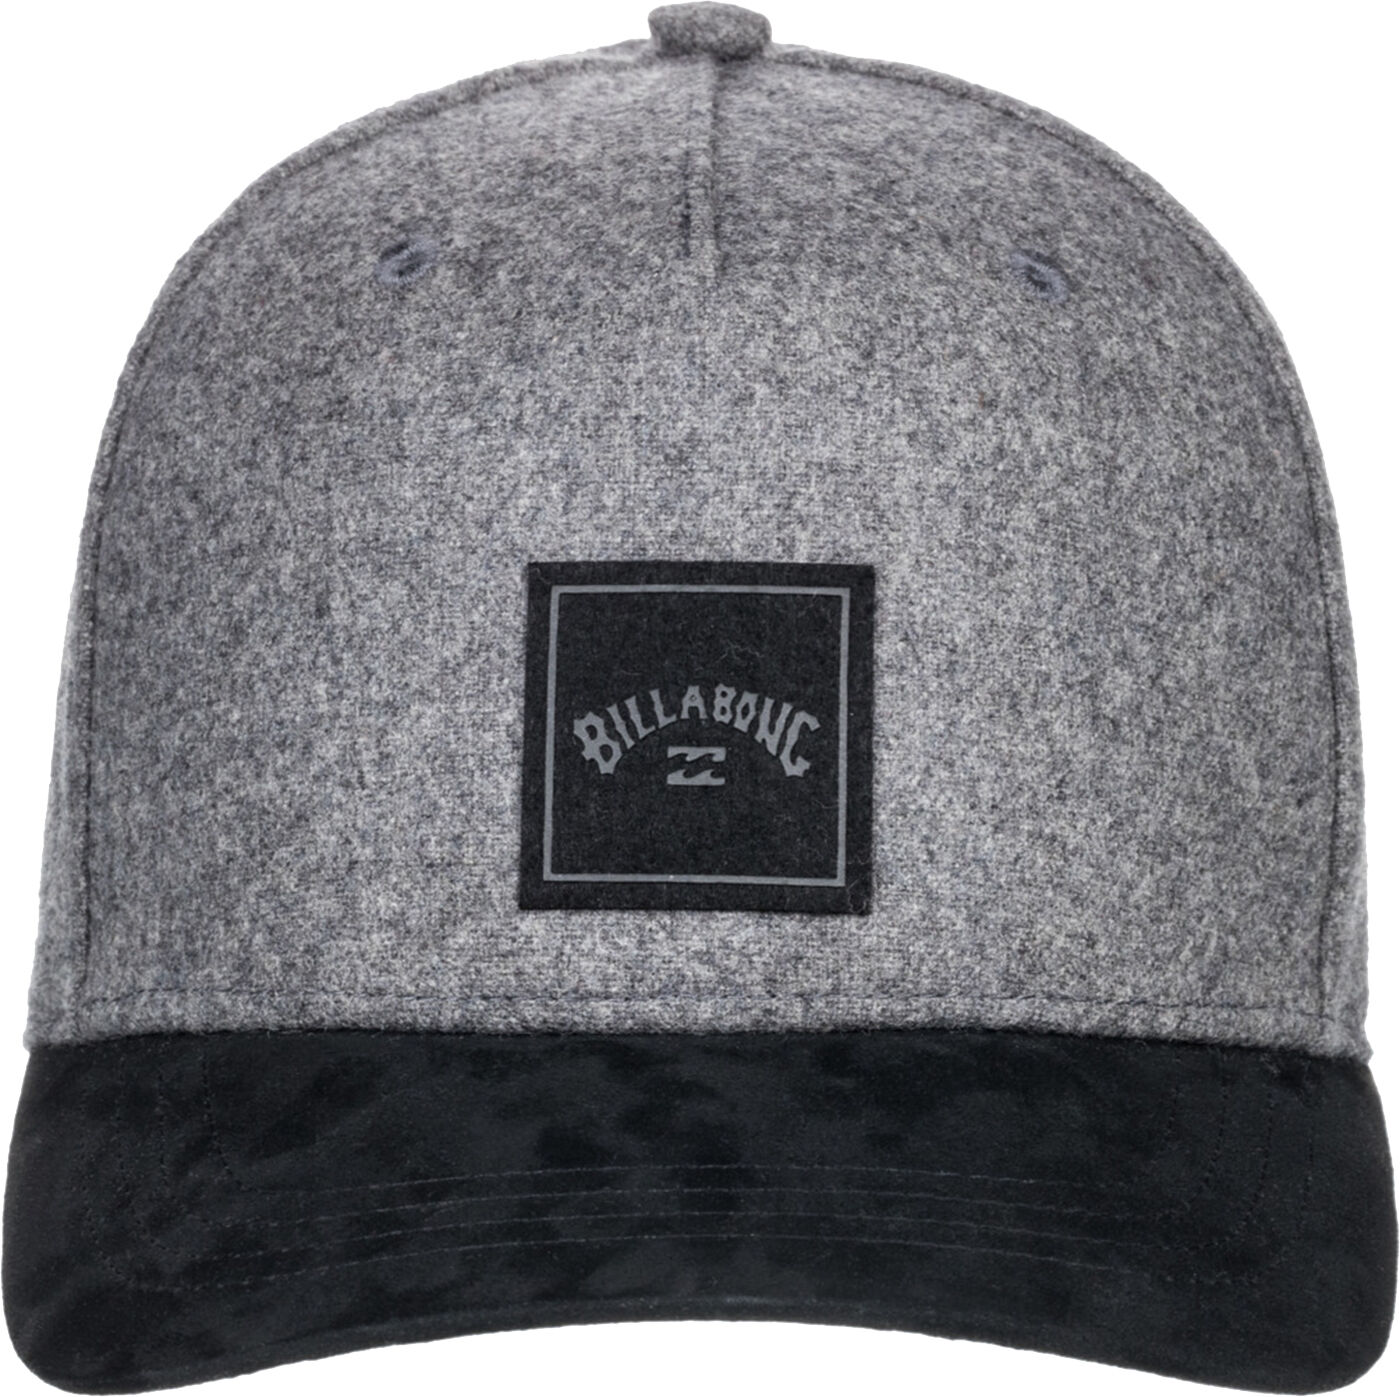 Billabong STACKED SNAPBACK HAT GREY HEATHER One Size